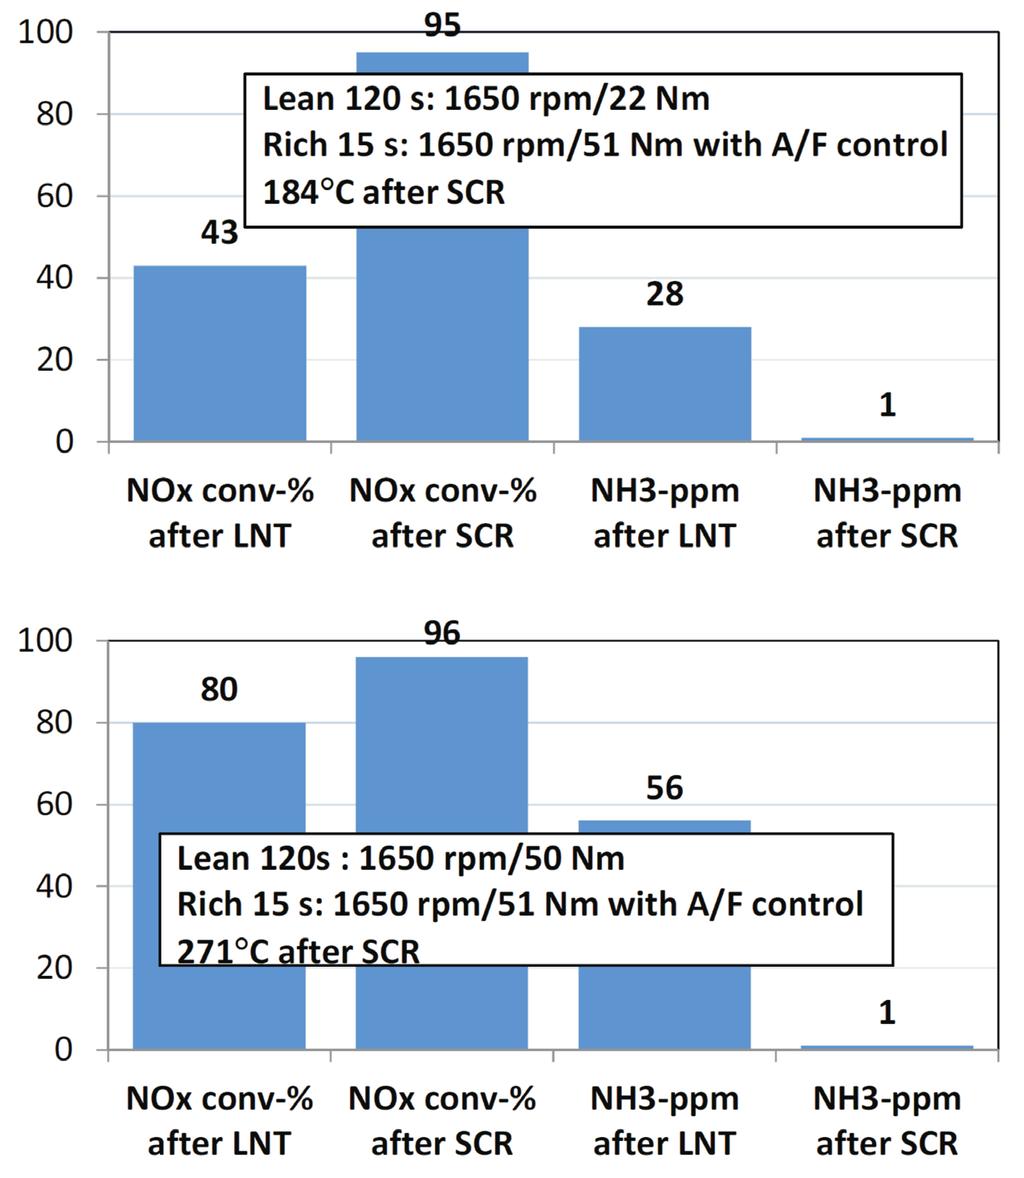 Combination of LNT and SCR for 95% in the point of 180 o C and from 80 to 96% in the point of 270 o C.